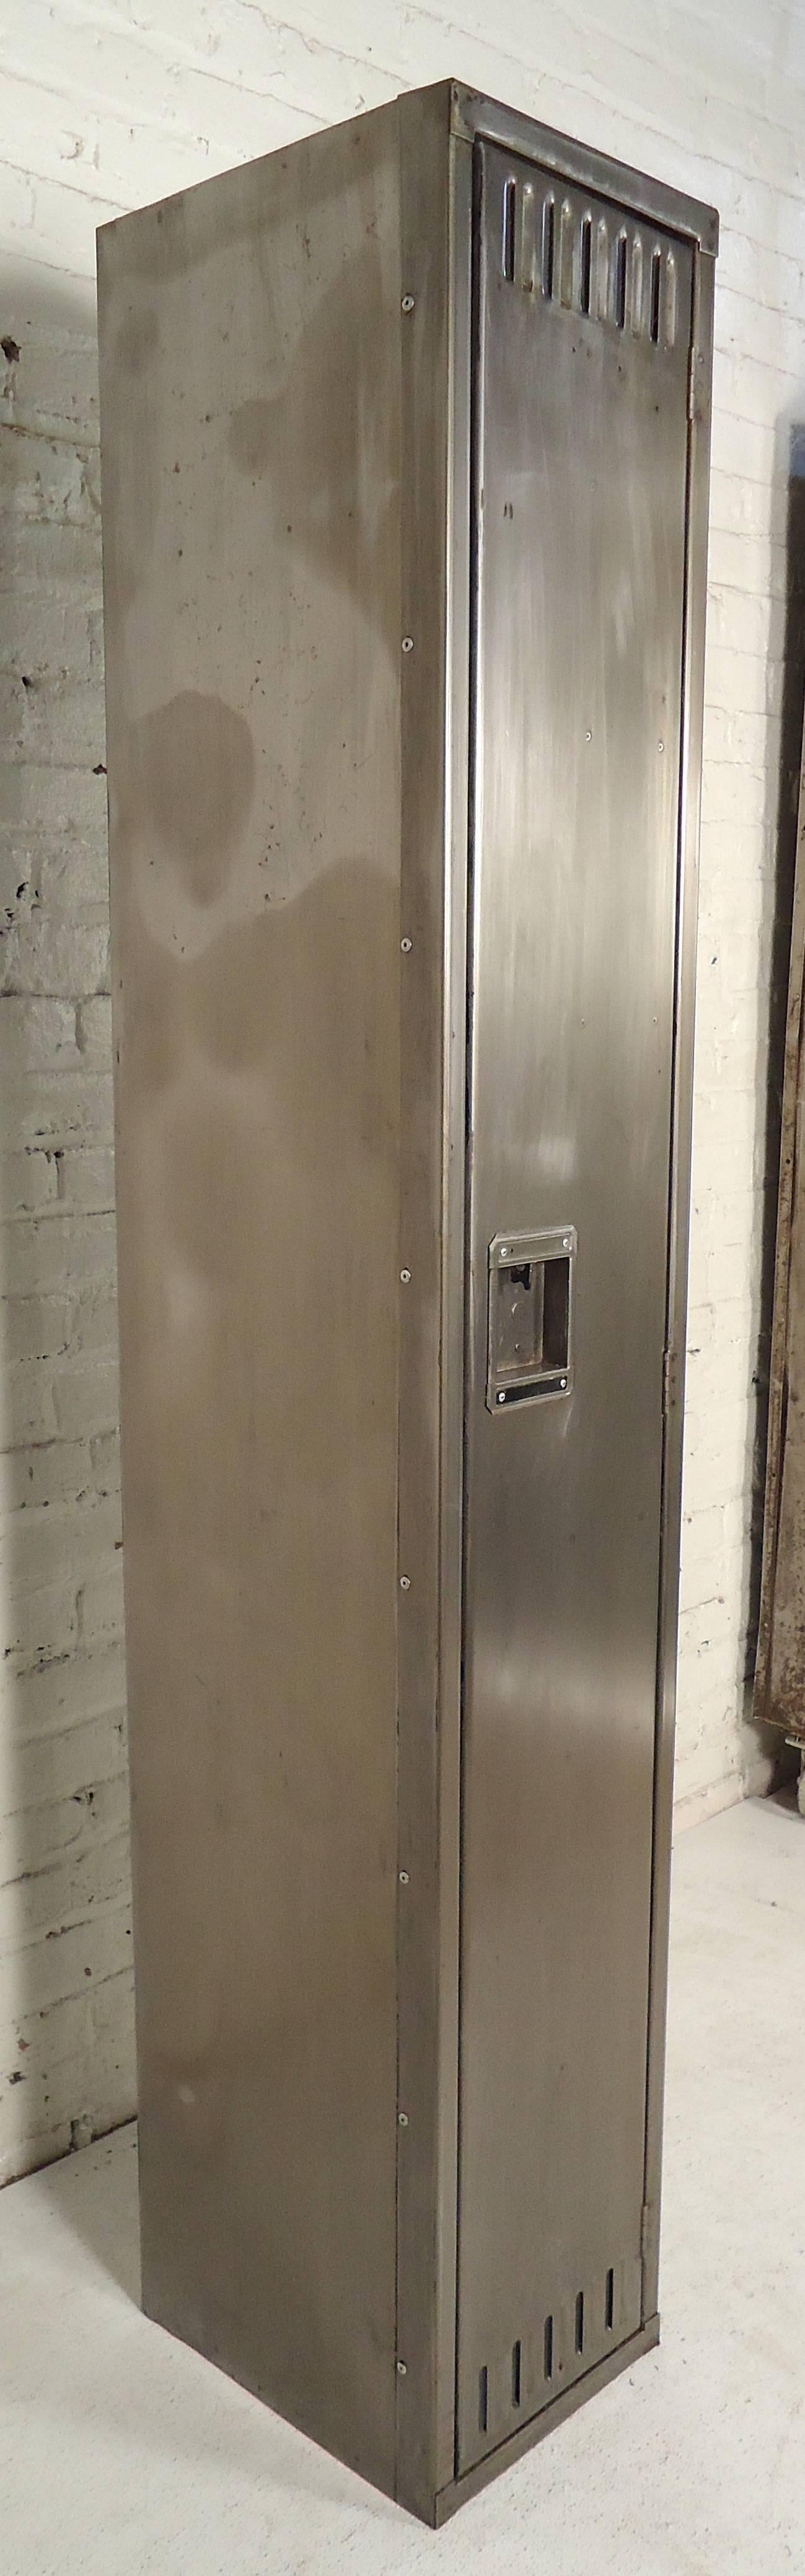 Vintage metal locker restored in a bare metal style finish. Inside is painted black with shelf and coat hooks.

(Please confirm item location - NY or NJ - with dealer).
 